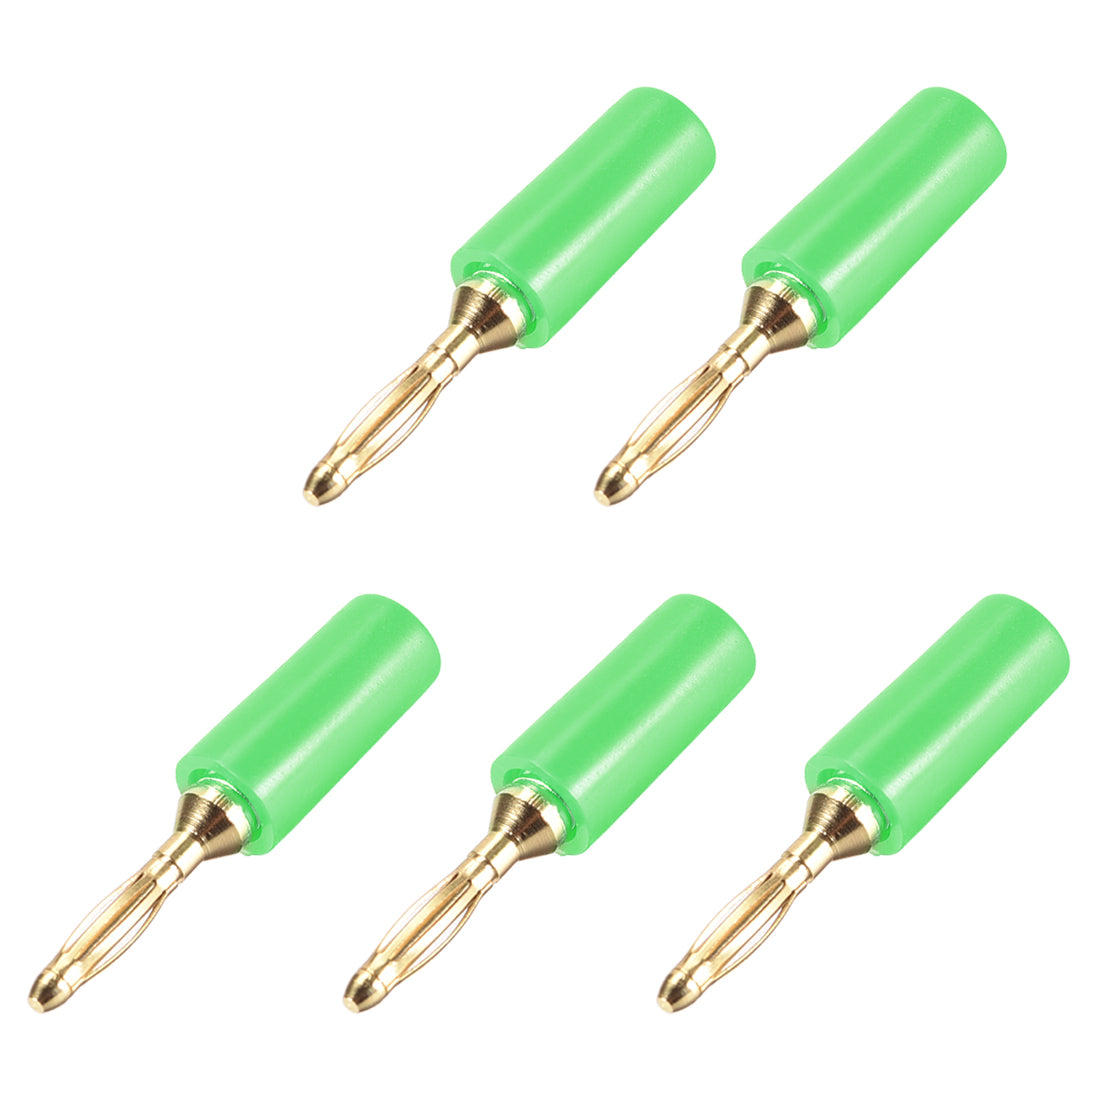 uxcell Uxcell 2mm Banana Speaker Wire Cable Plugs Connectors Gold Green 5pcs Jack Connector